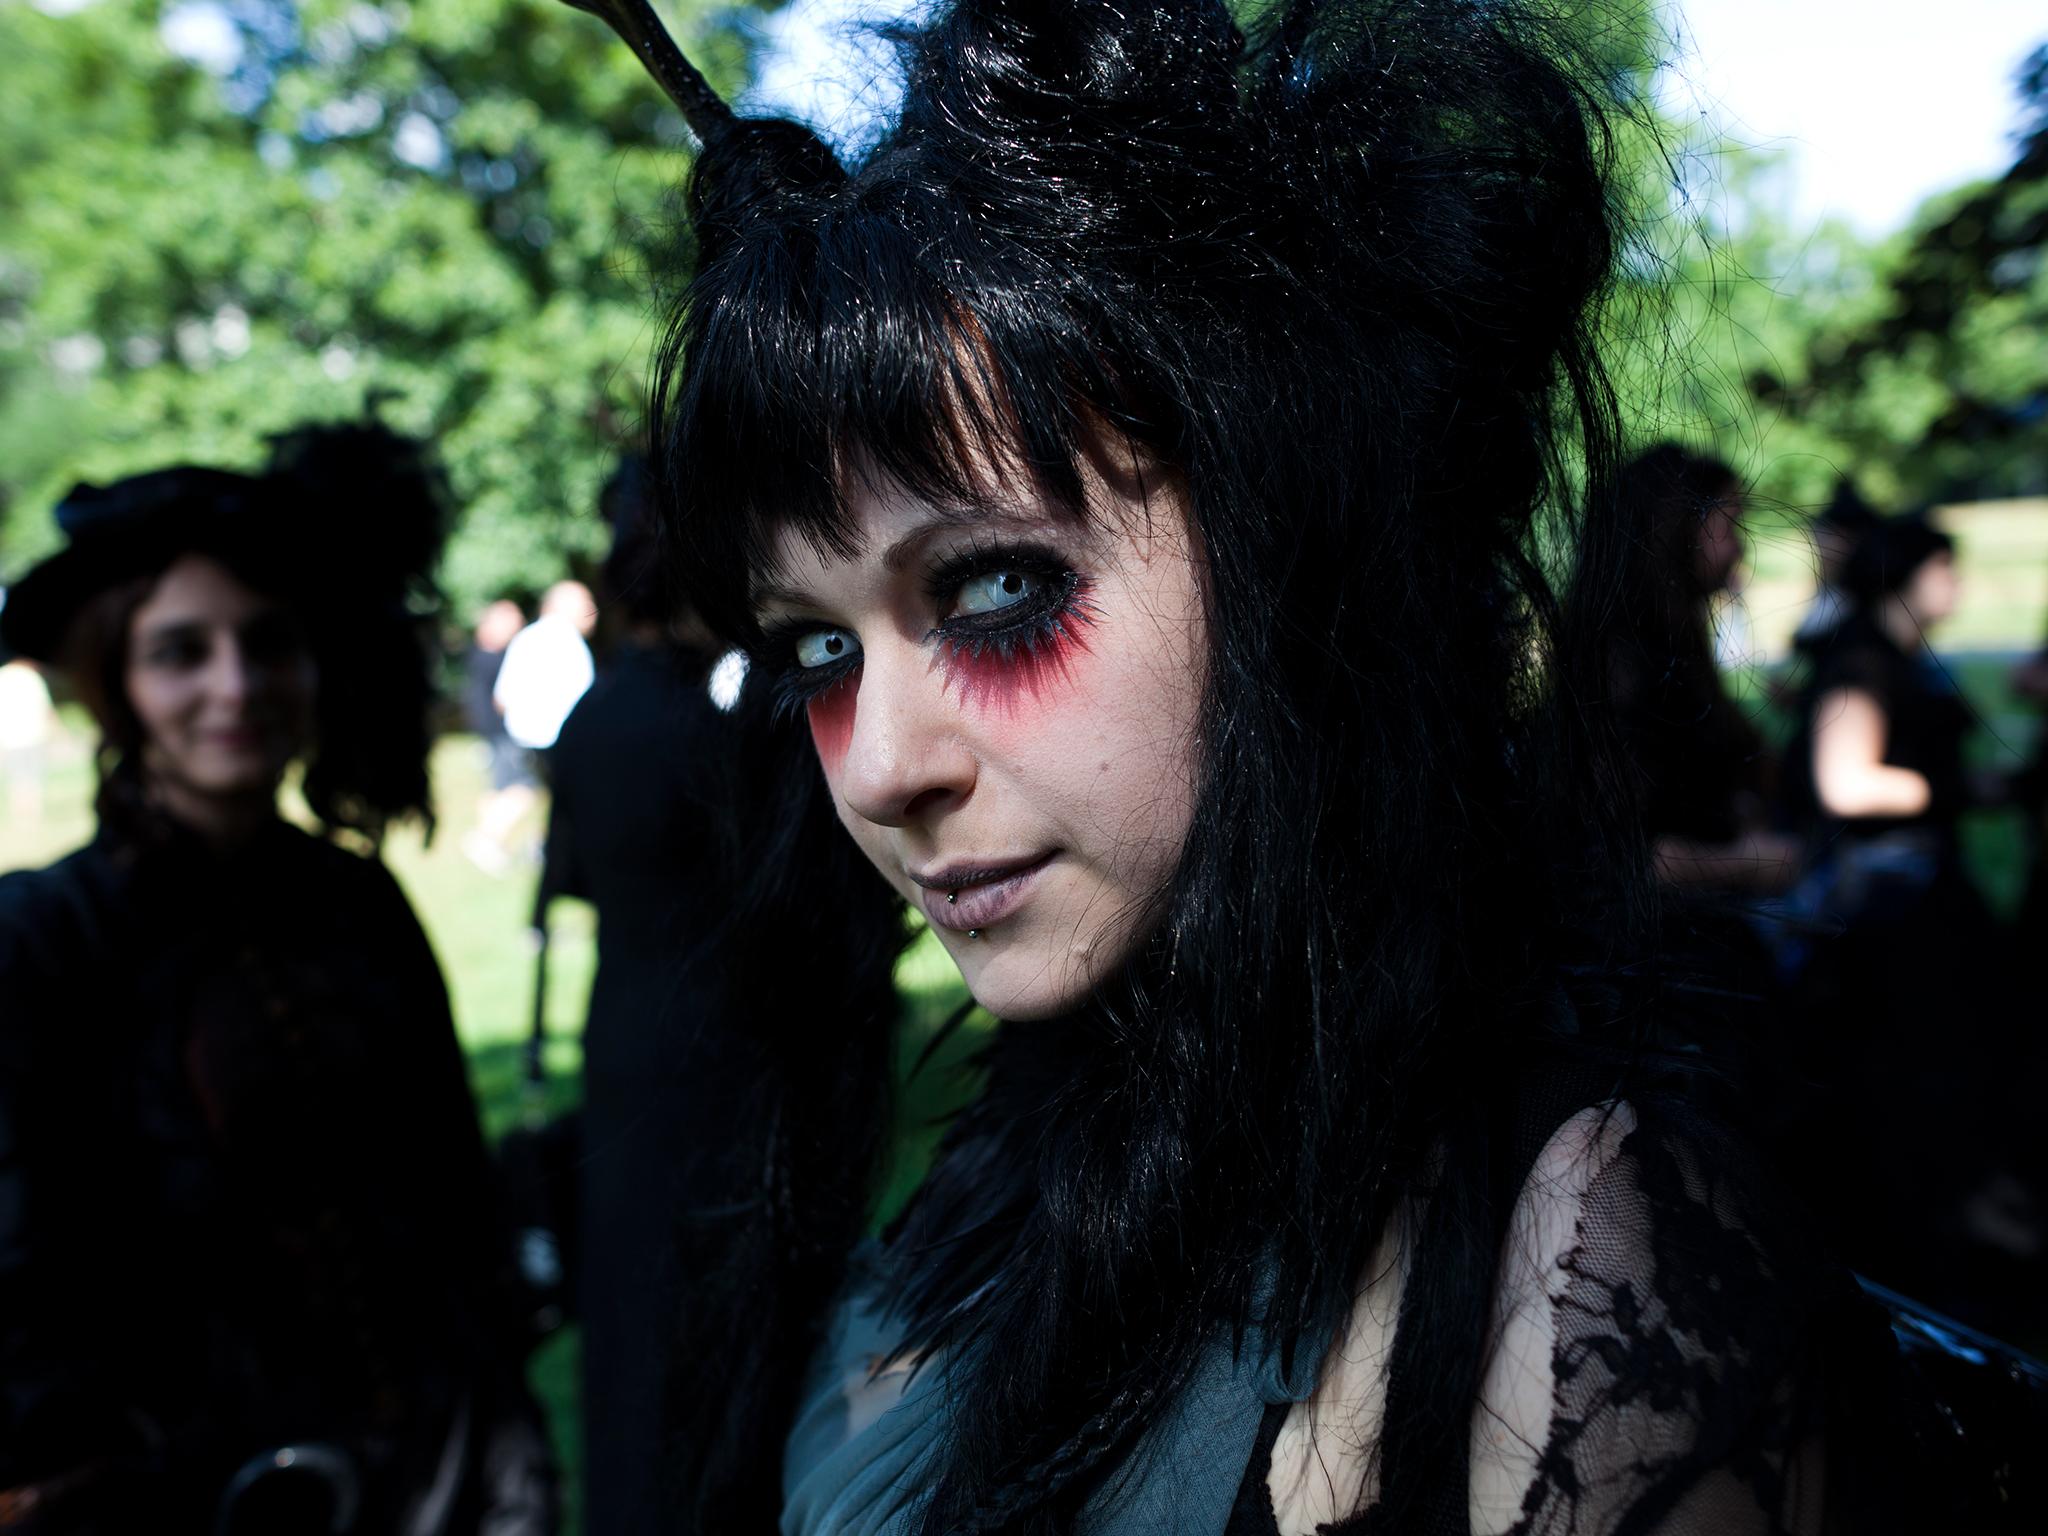 Around 20,000 people each year attend the Wave-Gotik festival in Leipzig, Germany (Getty)